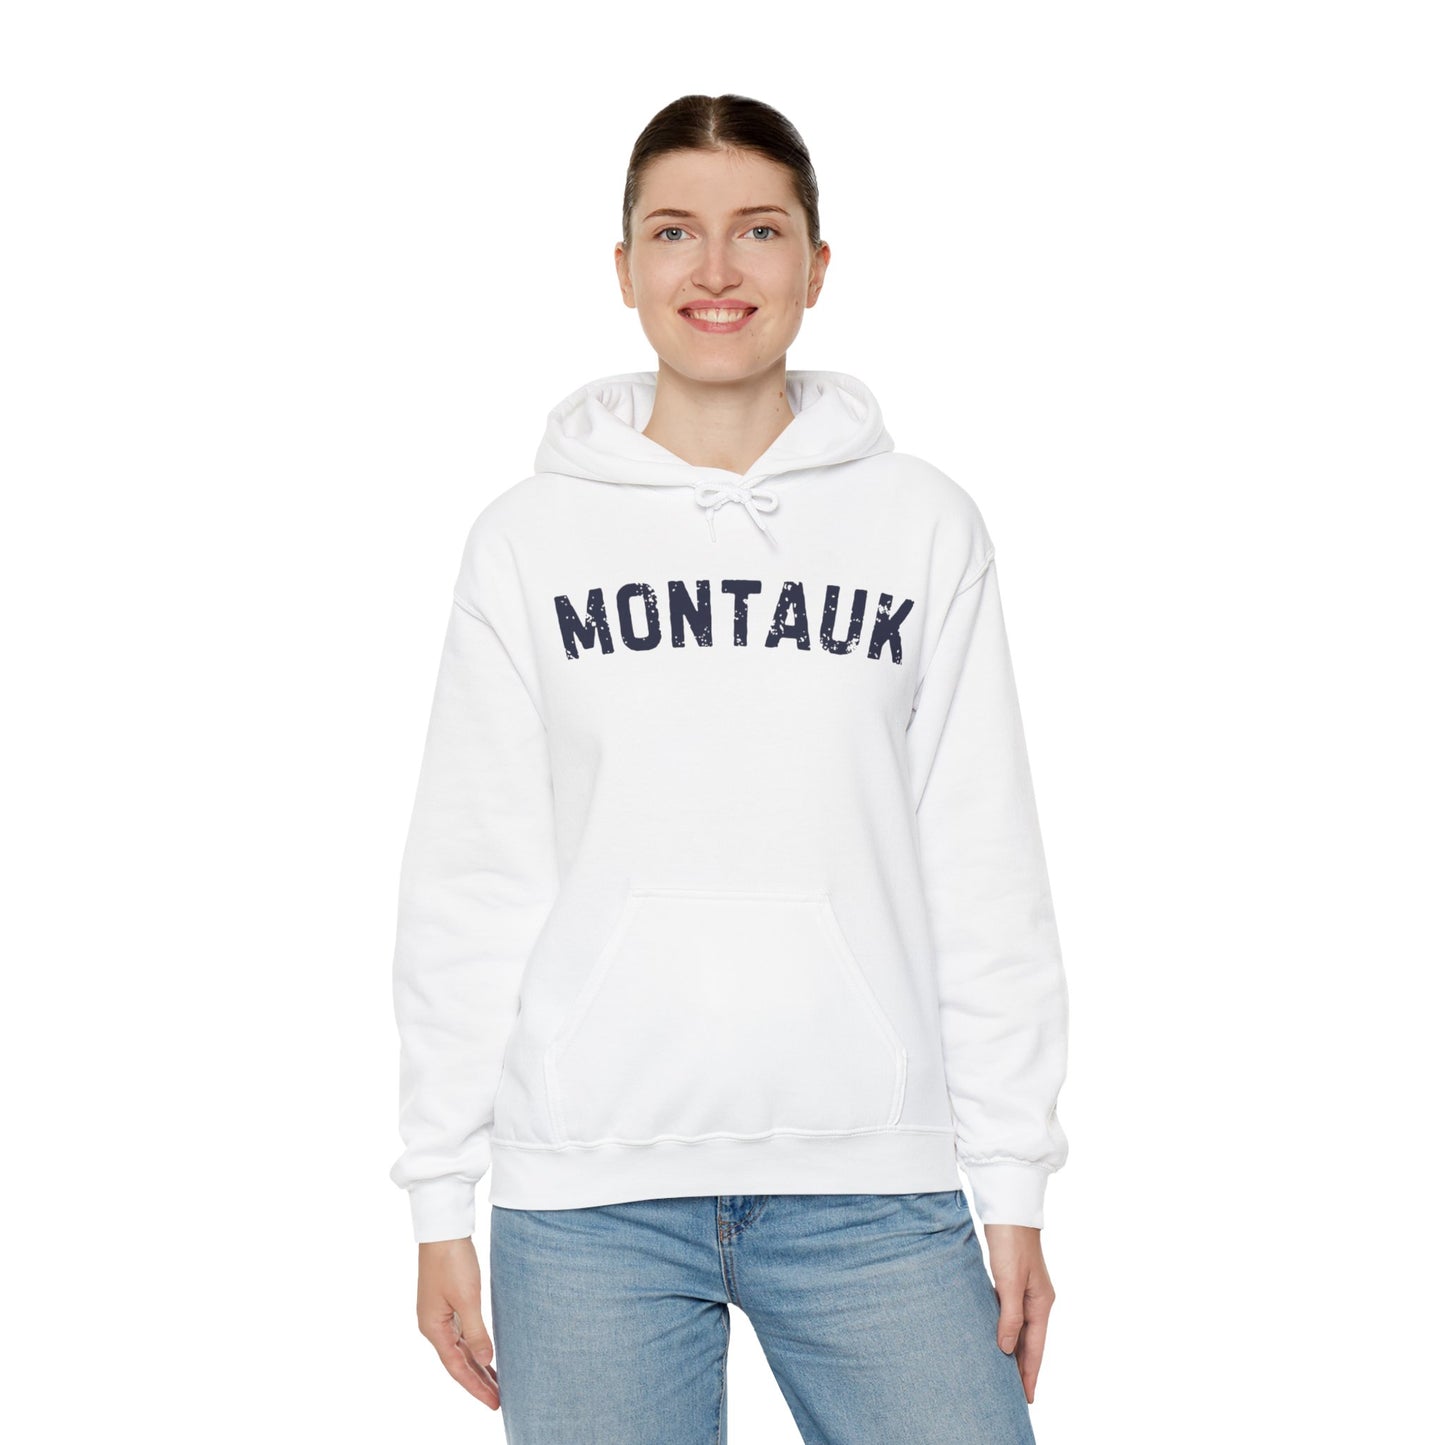 Montauk Essential Cozy Hoodie - Unisex, Cotton-Poly Blend for Ultimate Comfort